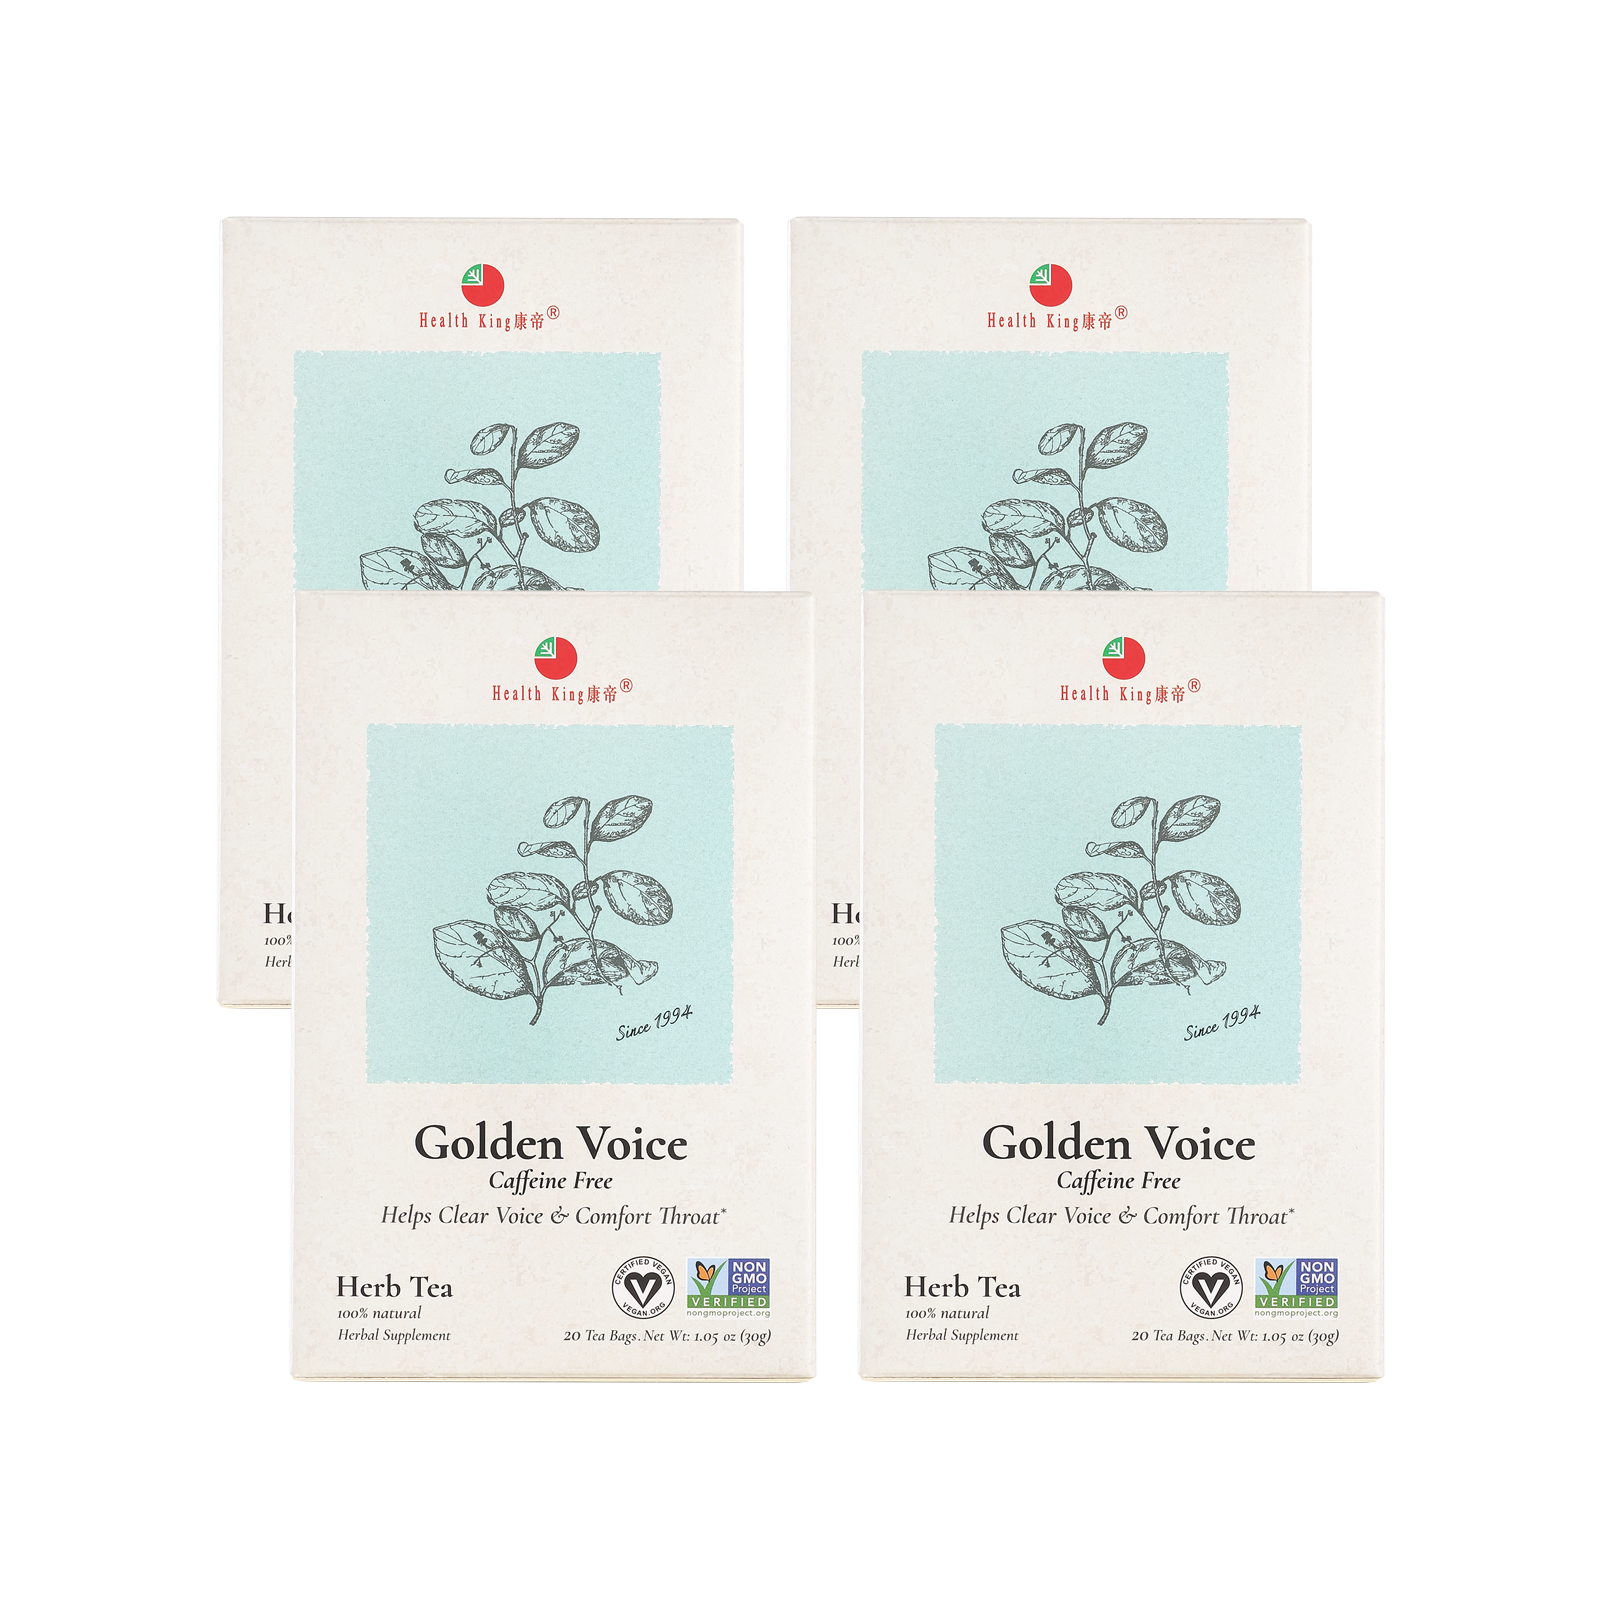 Multiple Golden Voice Herb Tea packets arranged on a pristine white surface